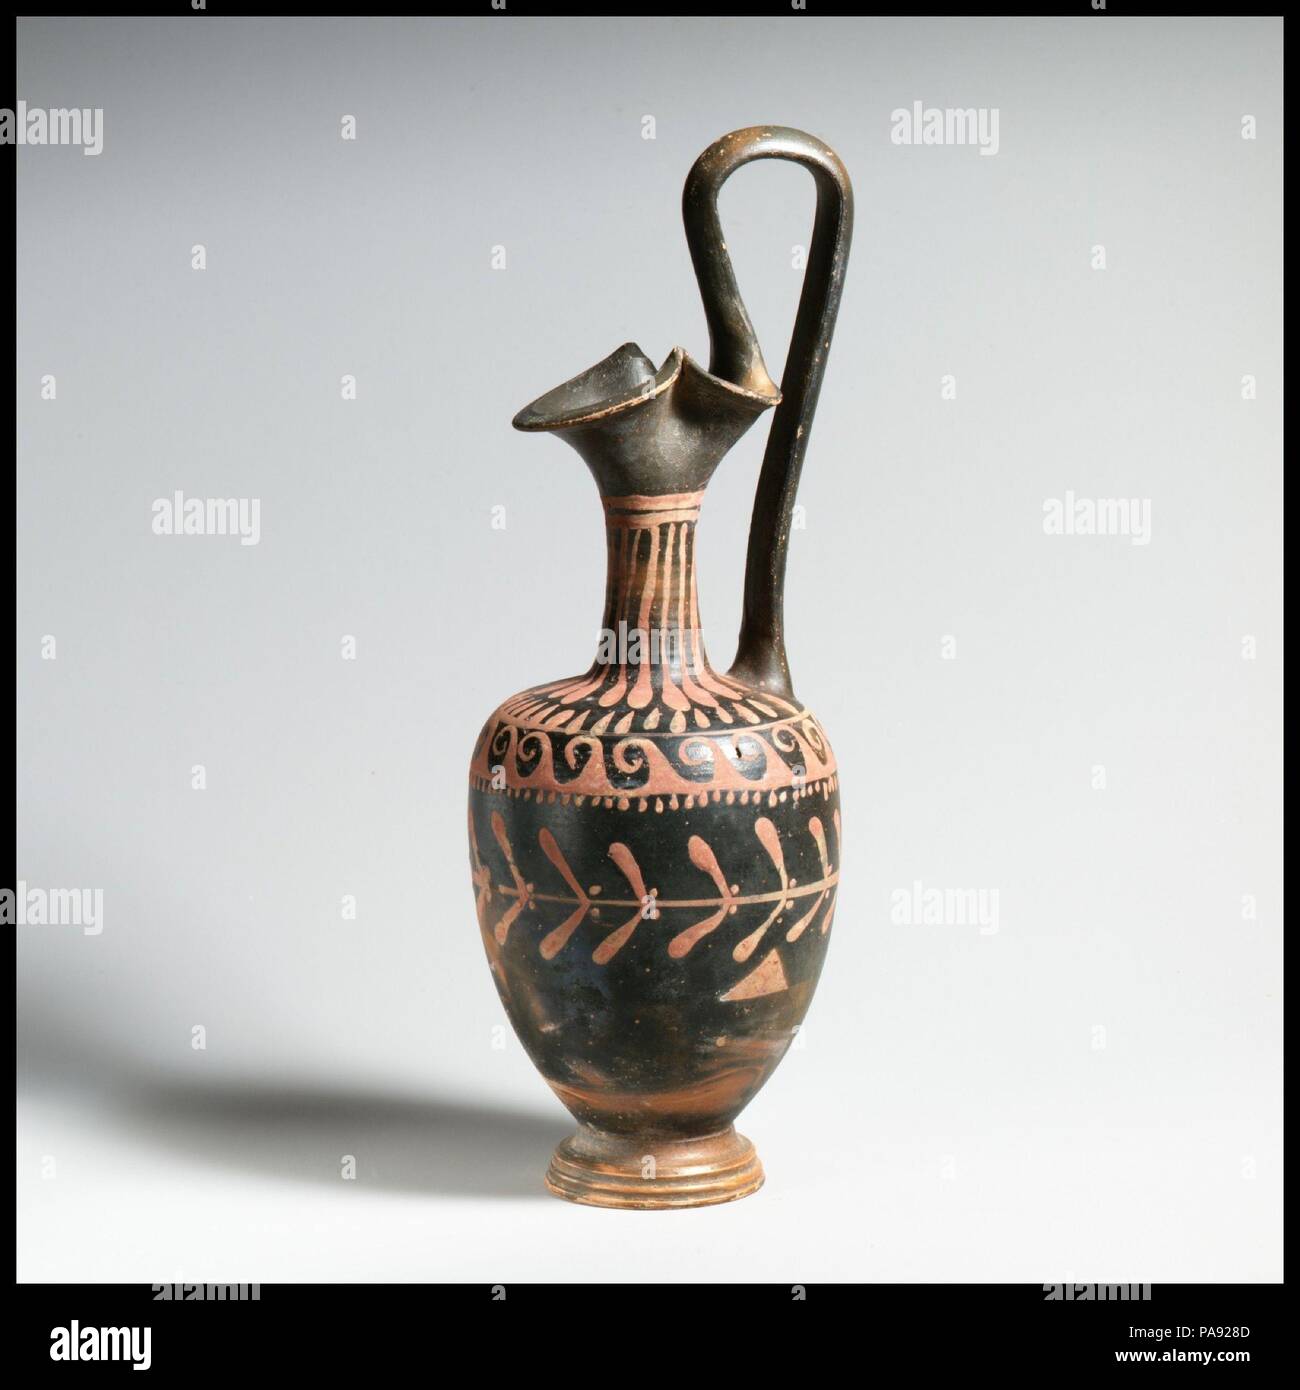 Terracotta oinochoe (jug). Culture: Greek, South Italian. Dimensions: H. 6  5/8 in. (16.8 cm). Date: late 4th century B.C.-early 3rd century B.C.. The  use of applied color for decoration was not limited,